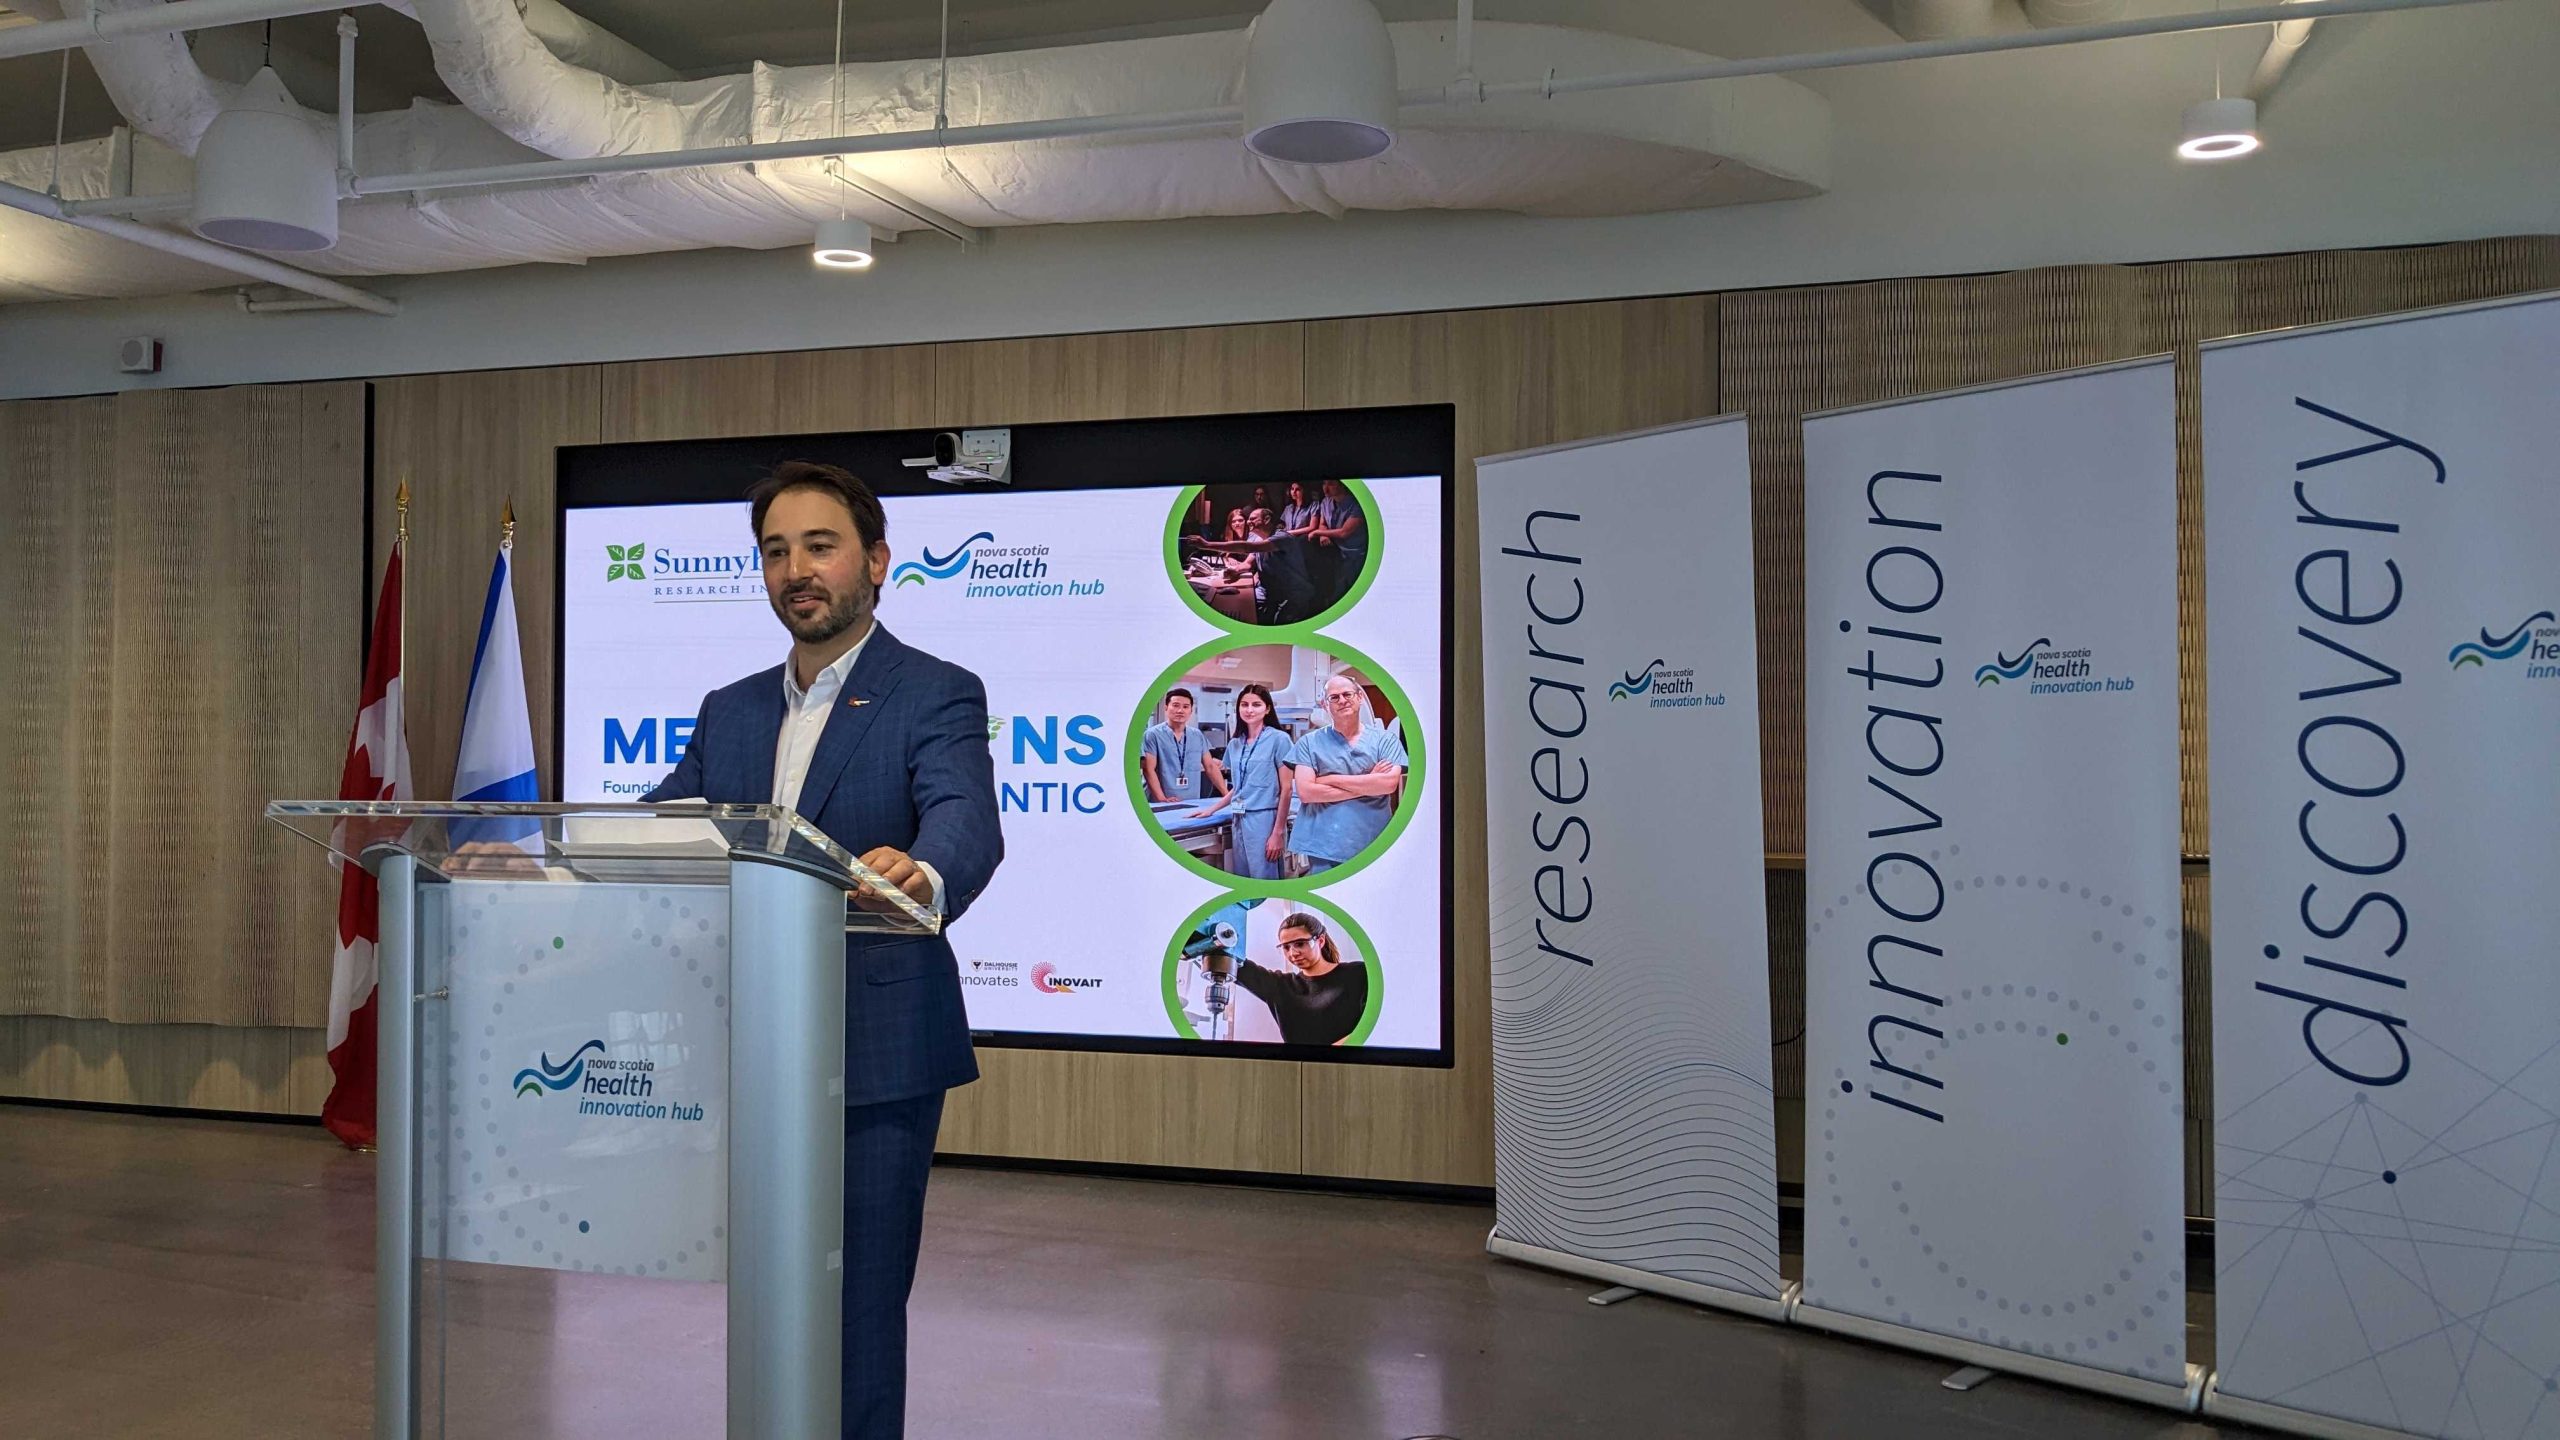 Raphael Ronen gives a speech at a podium at the Medventions Atlantic Launch event in Halifax, Nova Scotia.